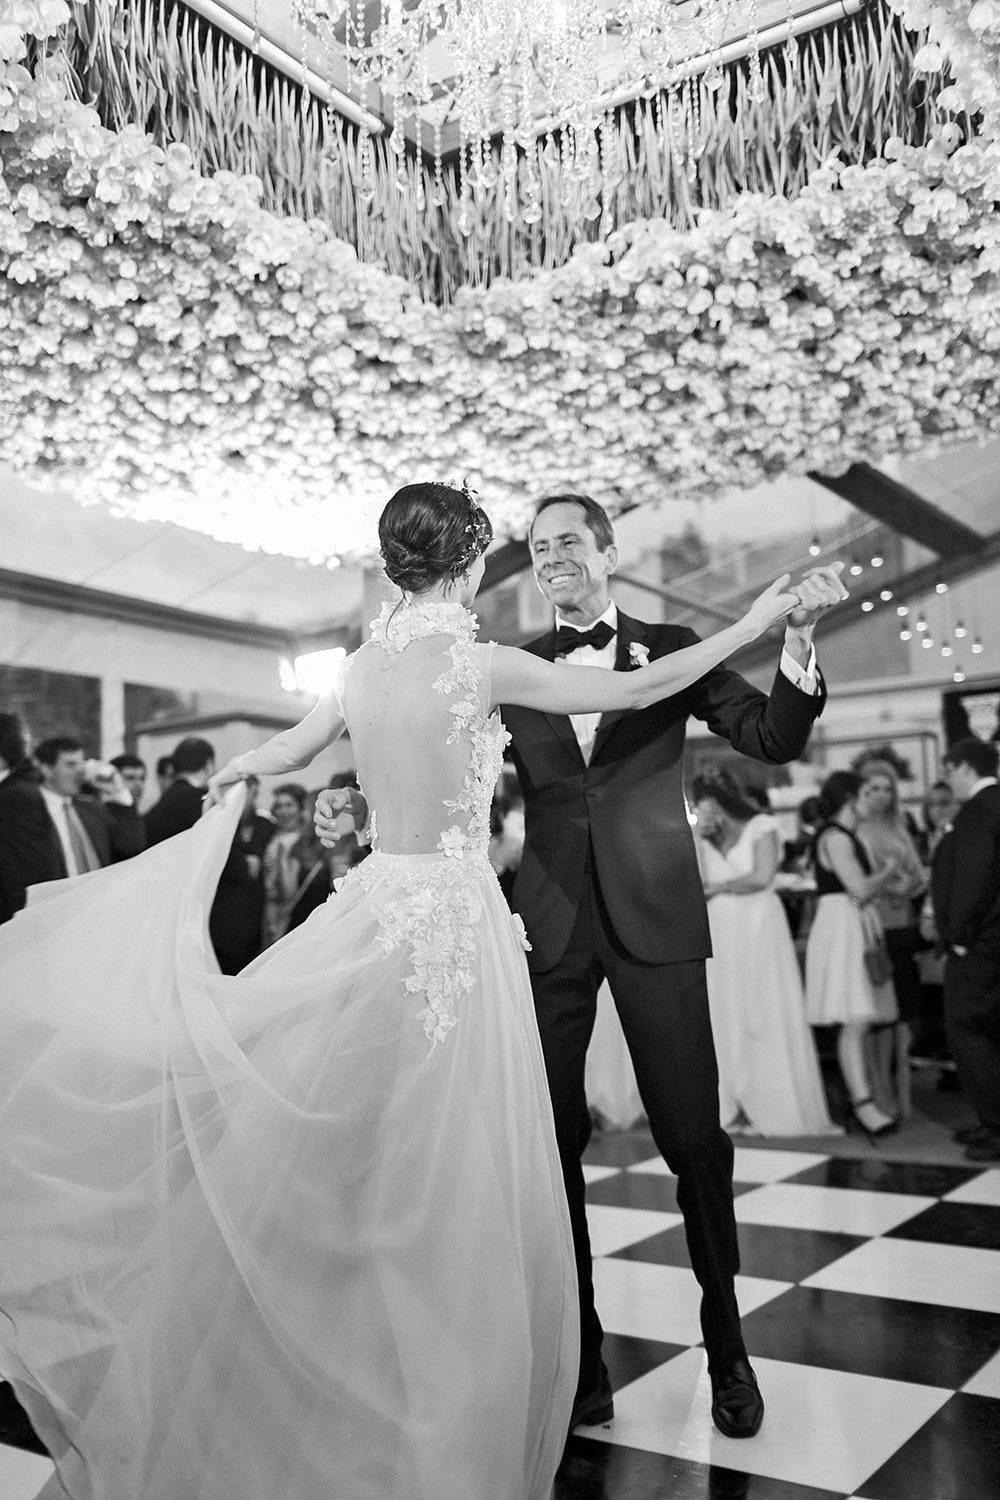 30 Absolutely Perfect First Dance Wedding Songs  First dance wedding songs,  Wedding first dance, Best first dance songs